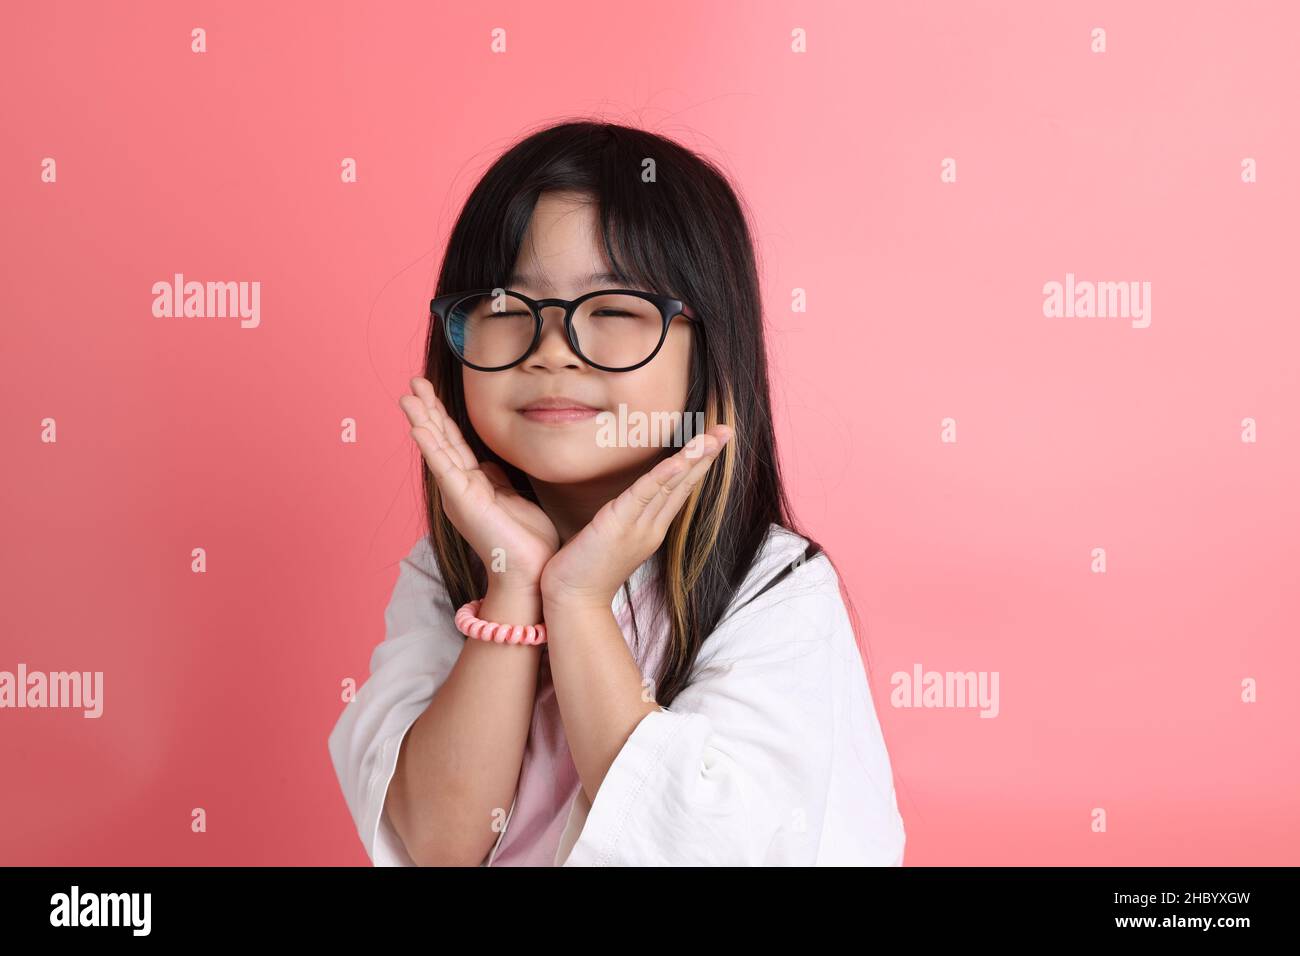 The young Asian girl portrait on the pink background. Stock Photo